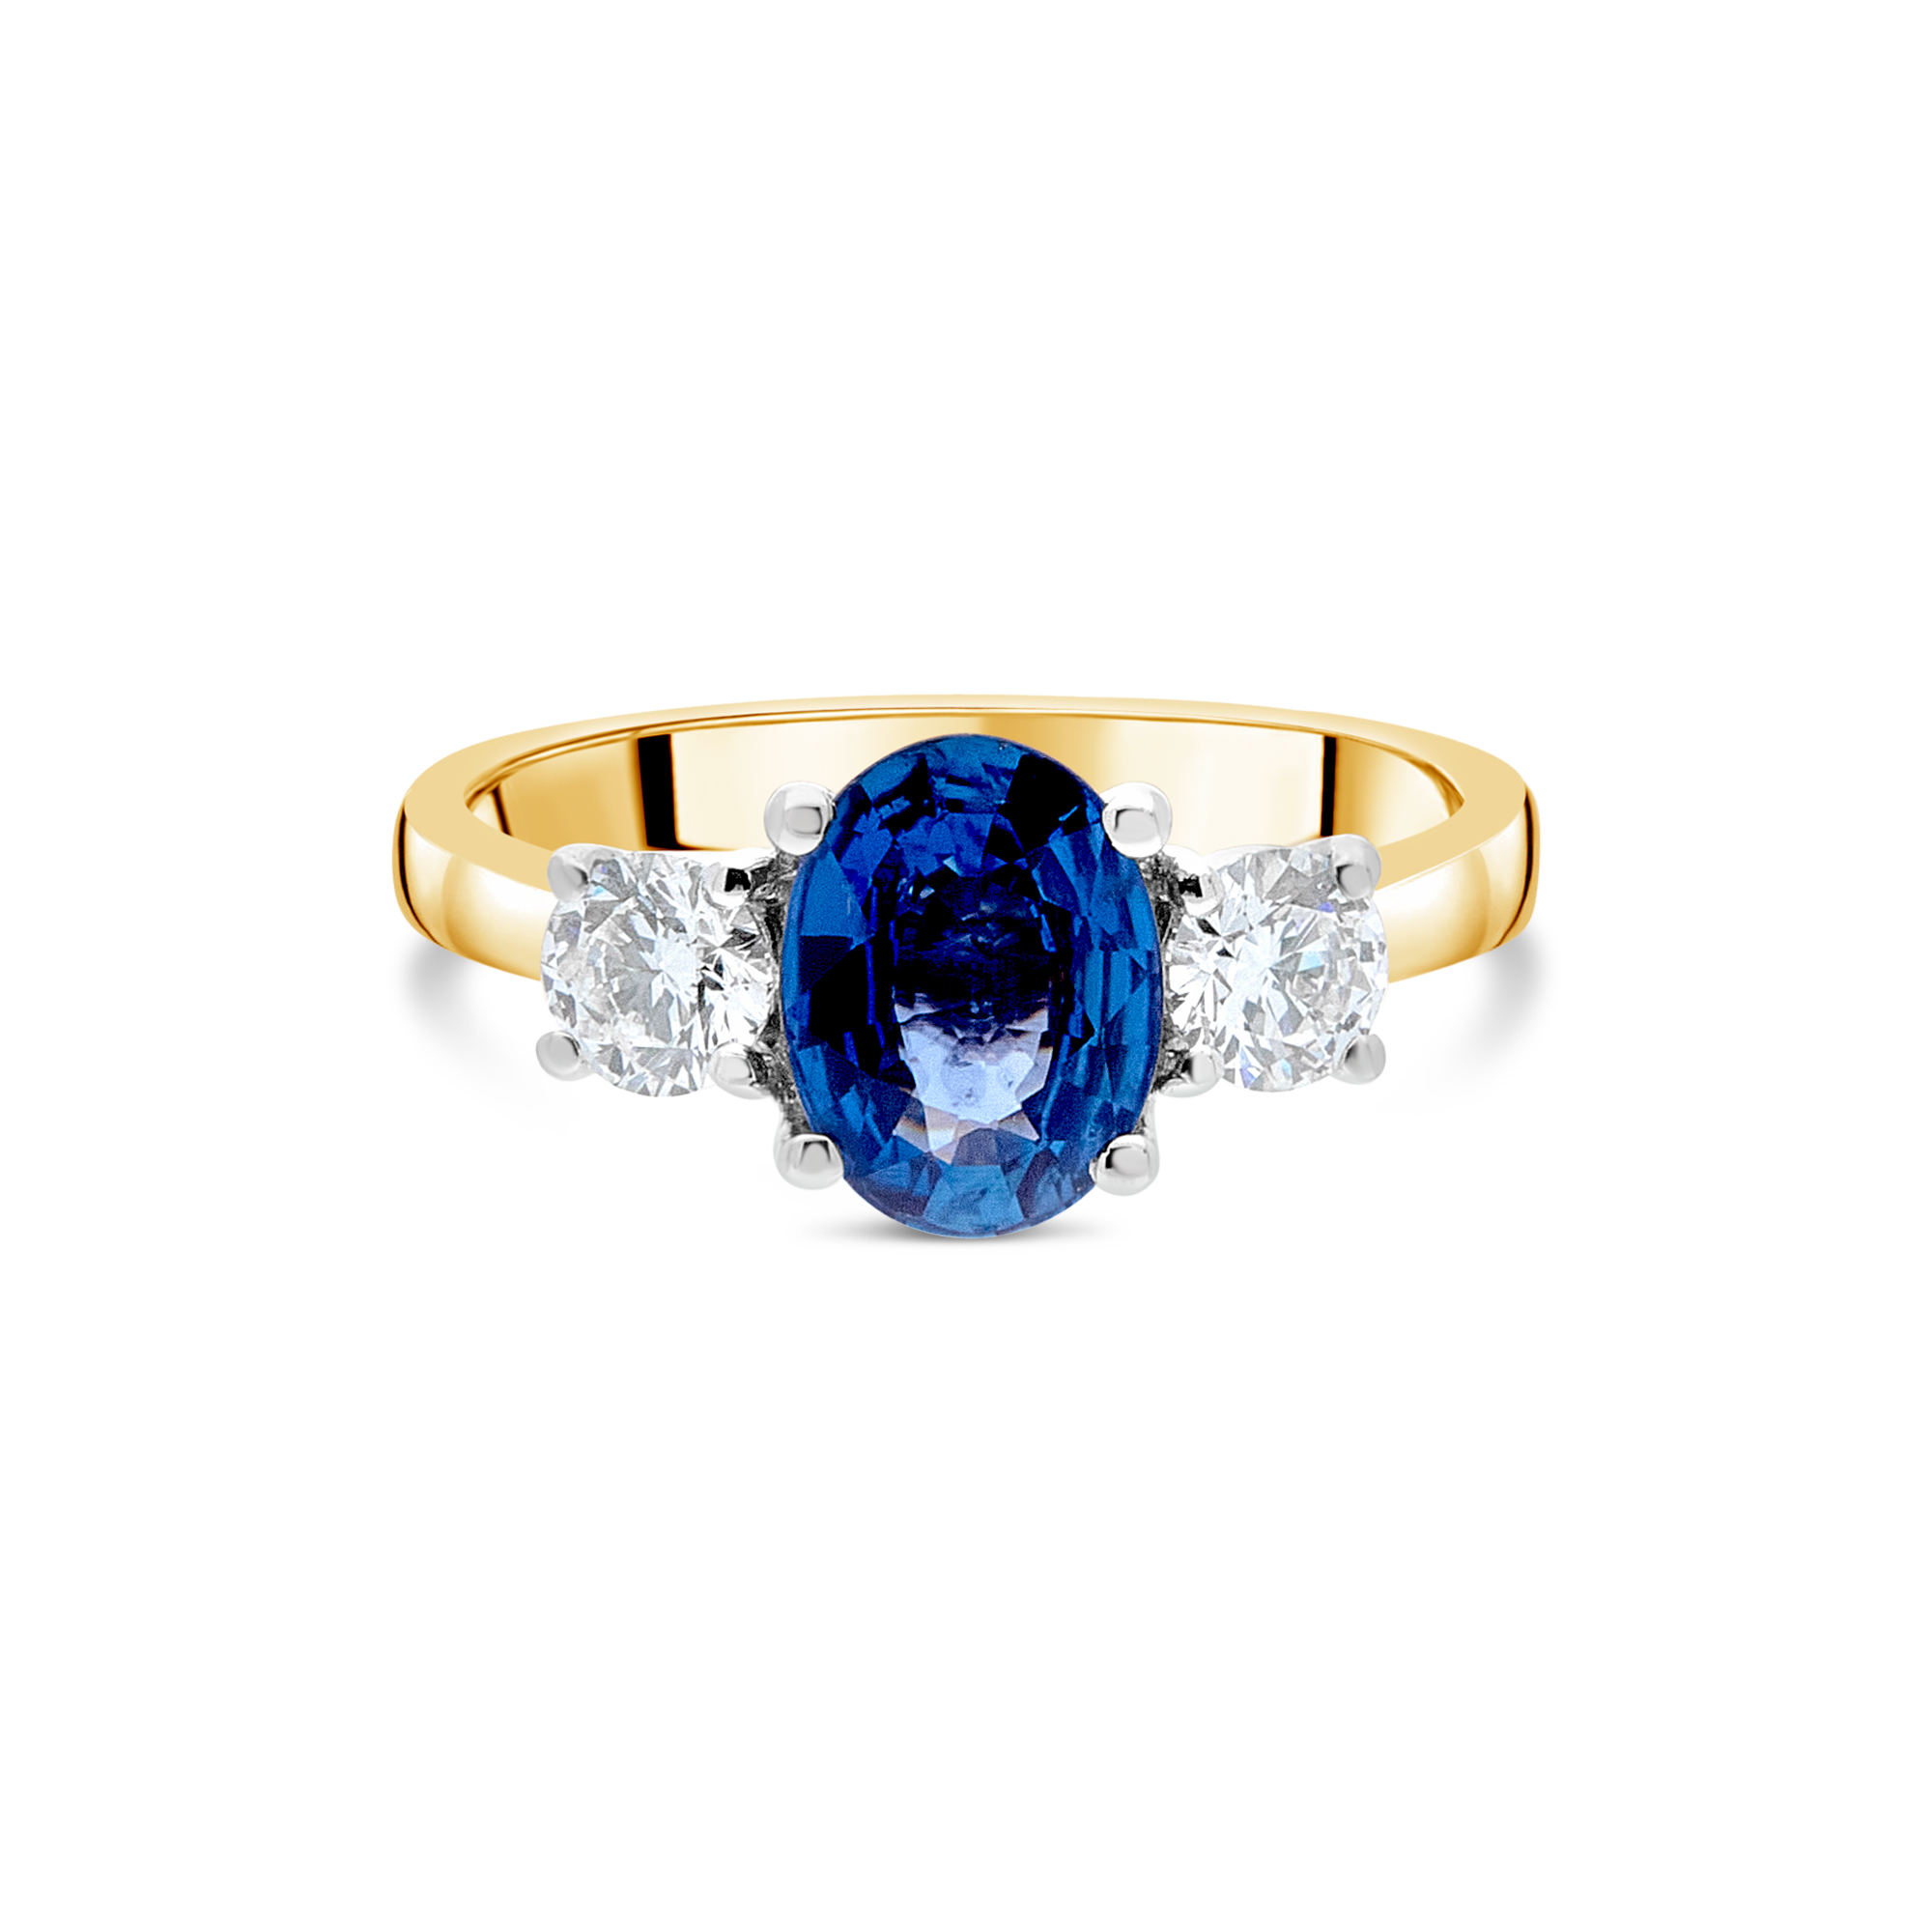 The "Tulip" with Sapphire and Diamond, Yellow Gold